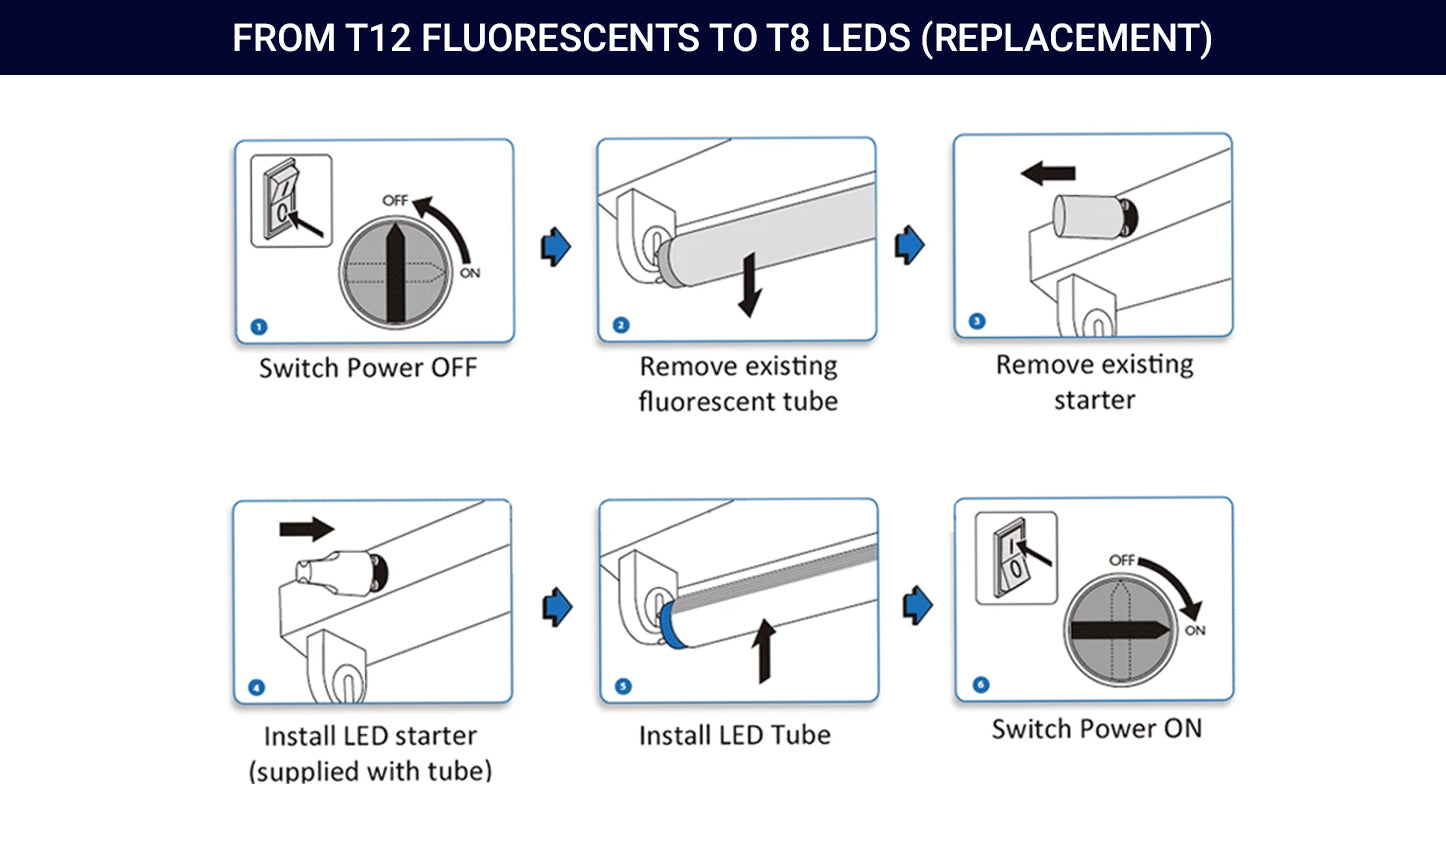 5 Reasons To Upgrade From T12 Fluorescents To T8 LEDs – LEDMyPlace